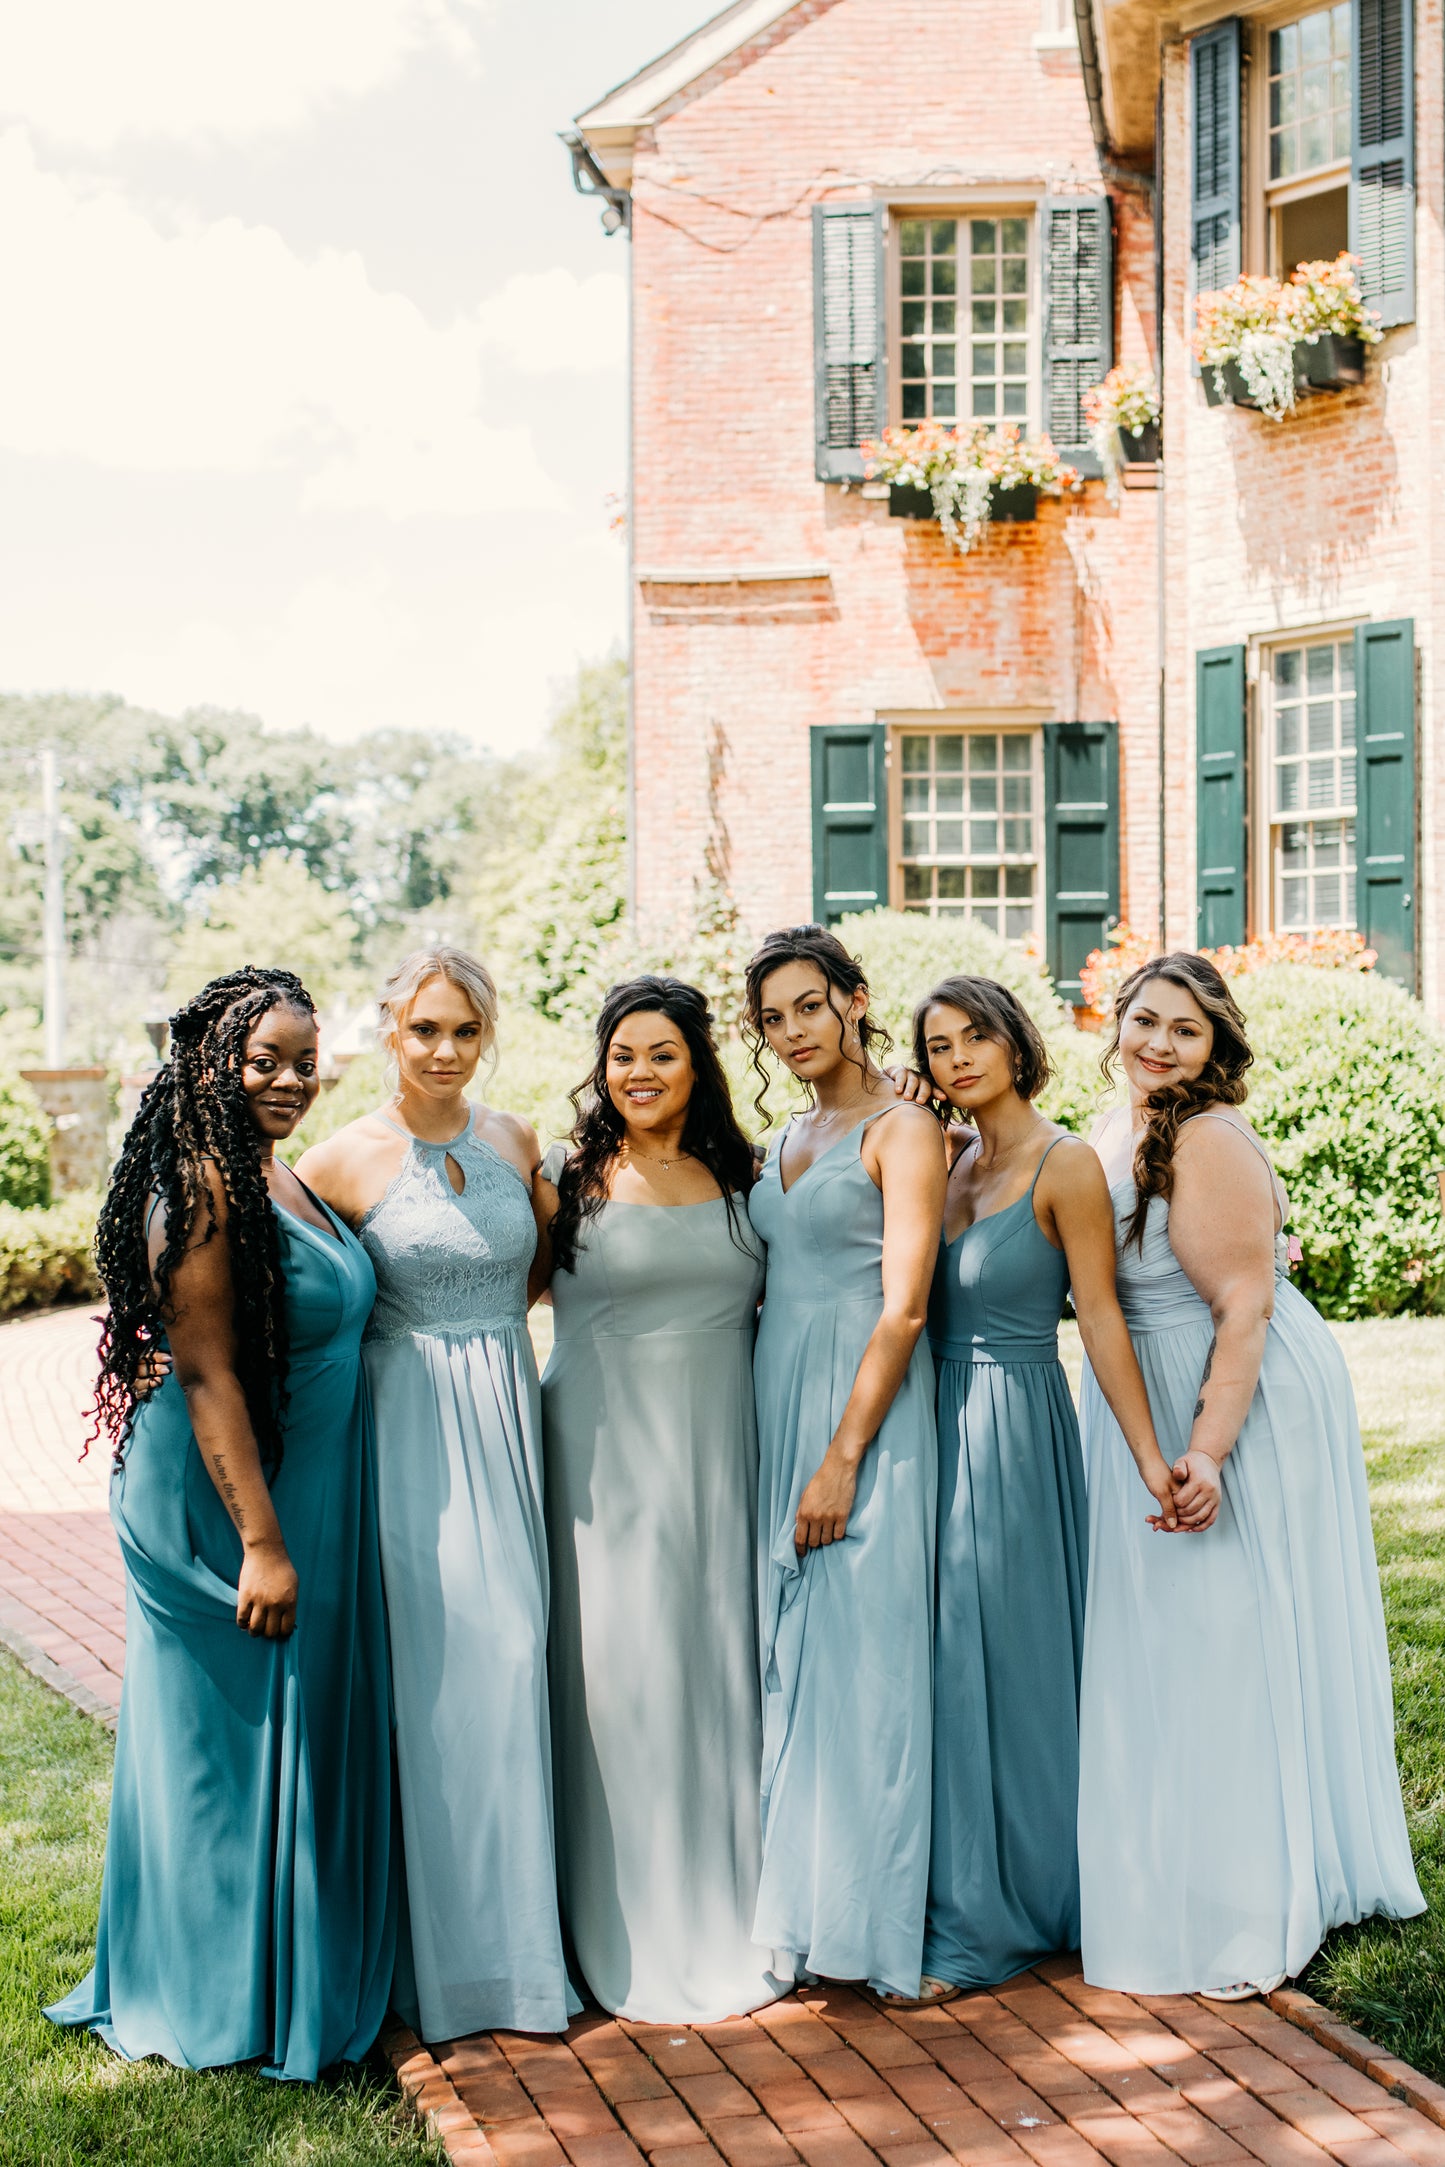 Jess (left) and Hope (third from right) wear the Alyssa Dress